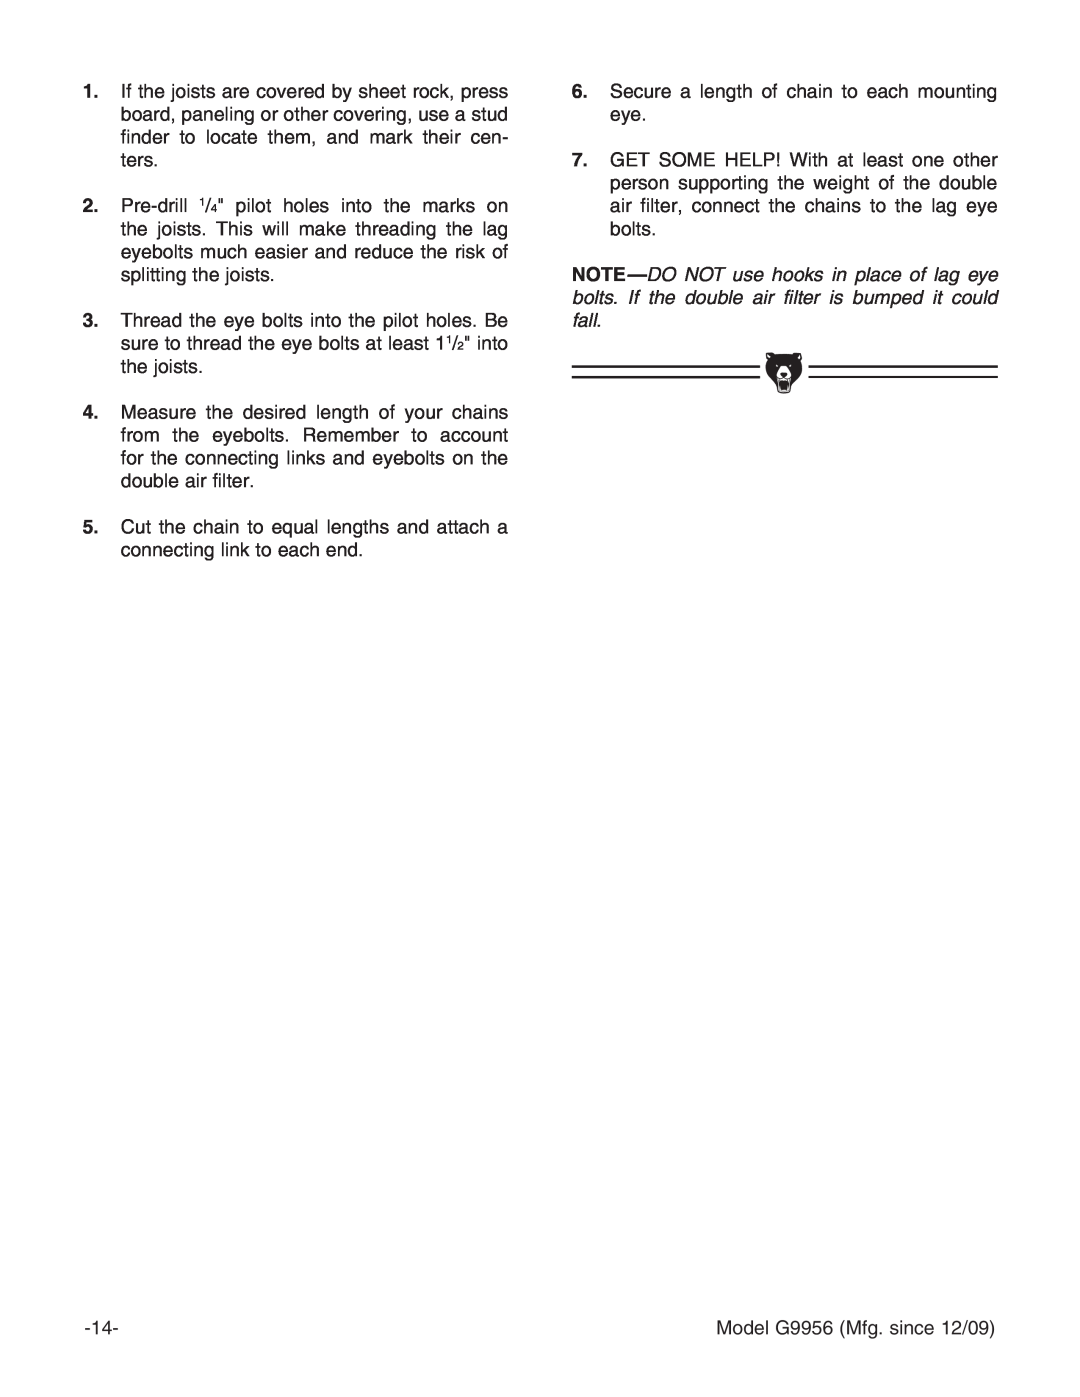 Grizzly G9956 instruction manual Secure a length of chain to each mounting eye 